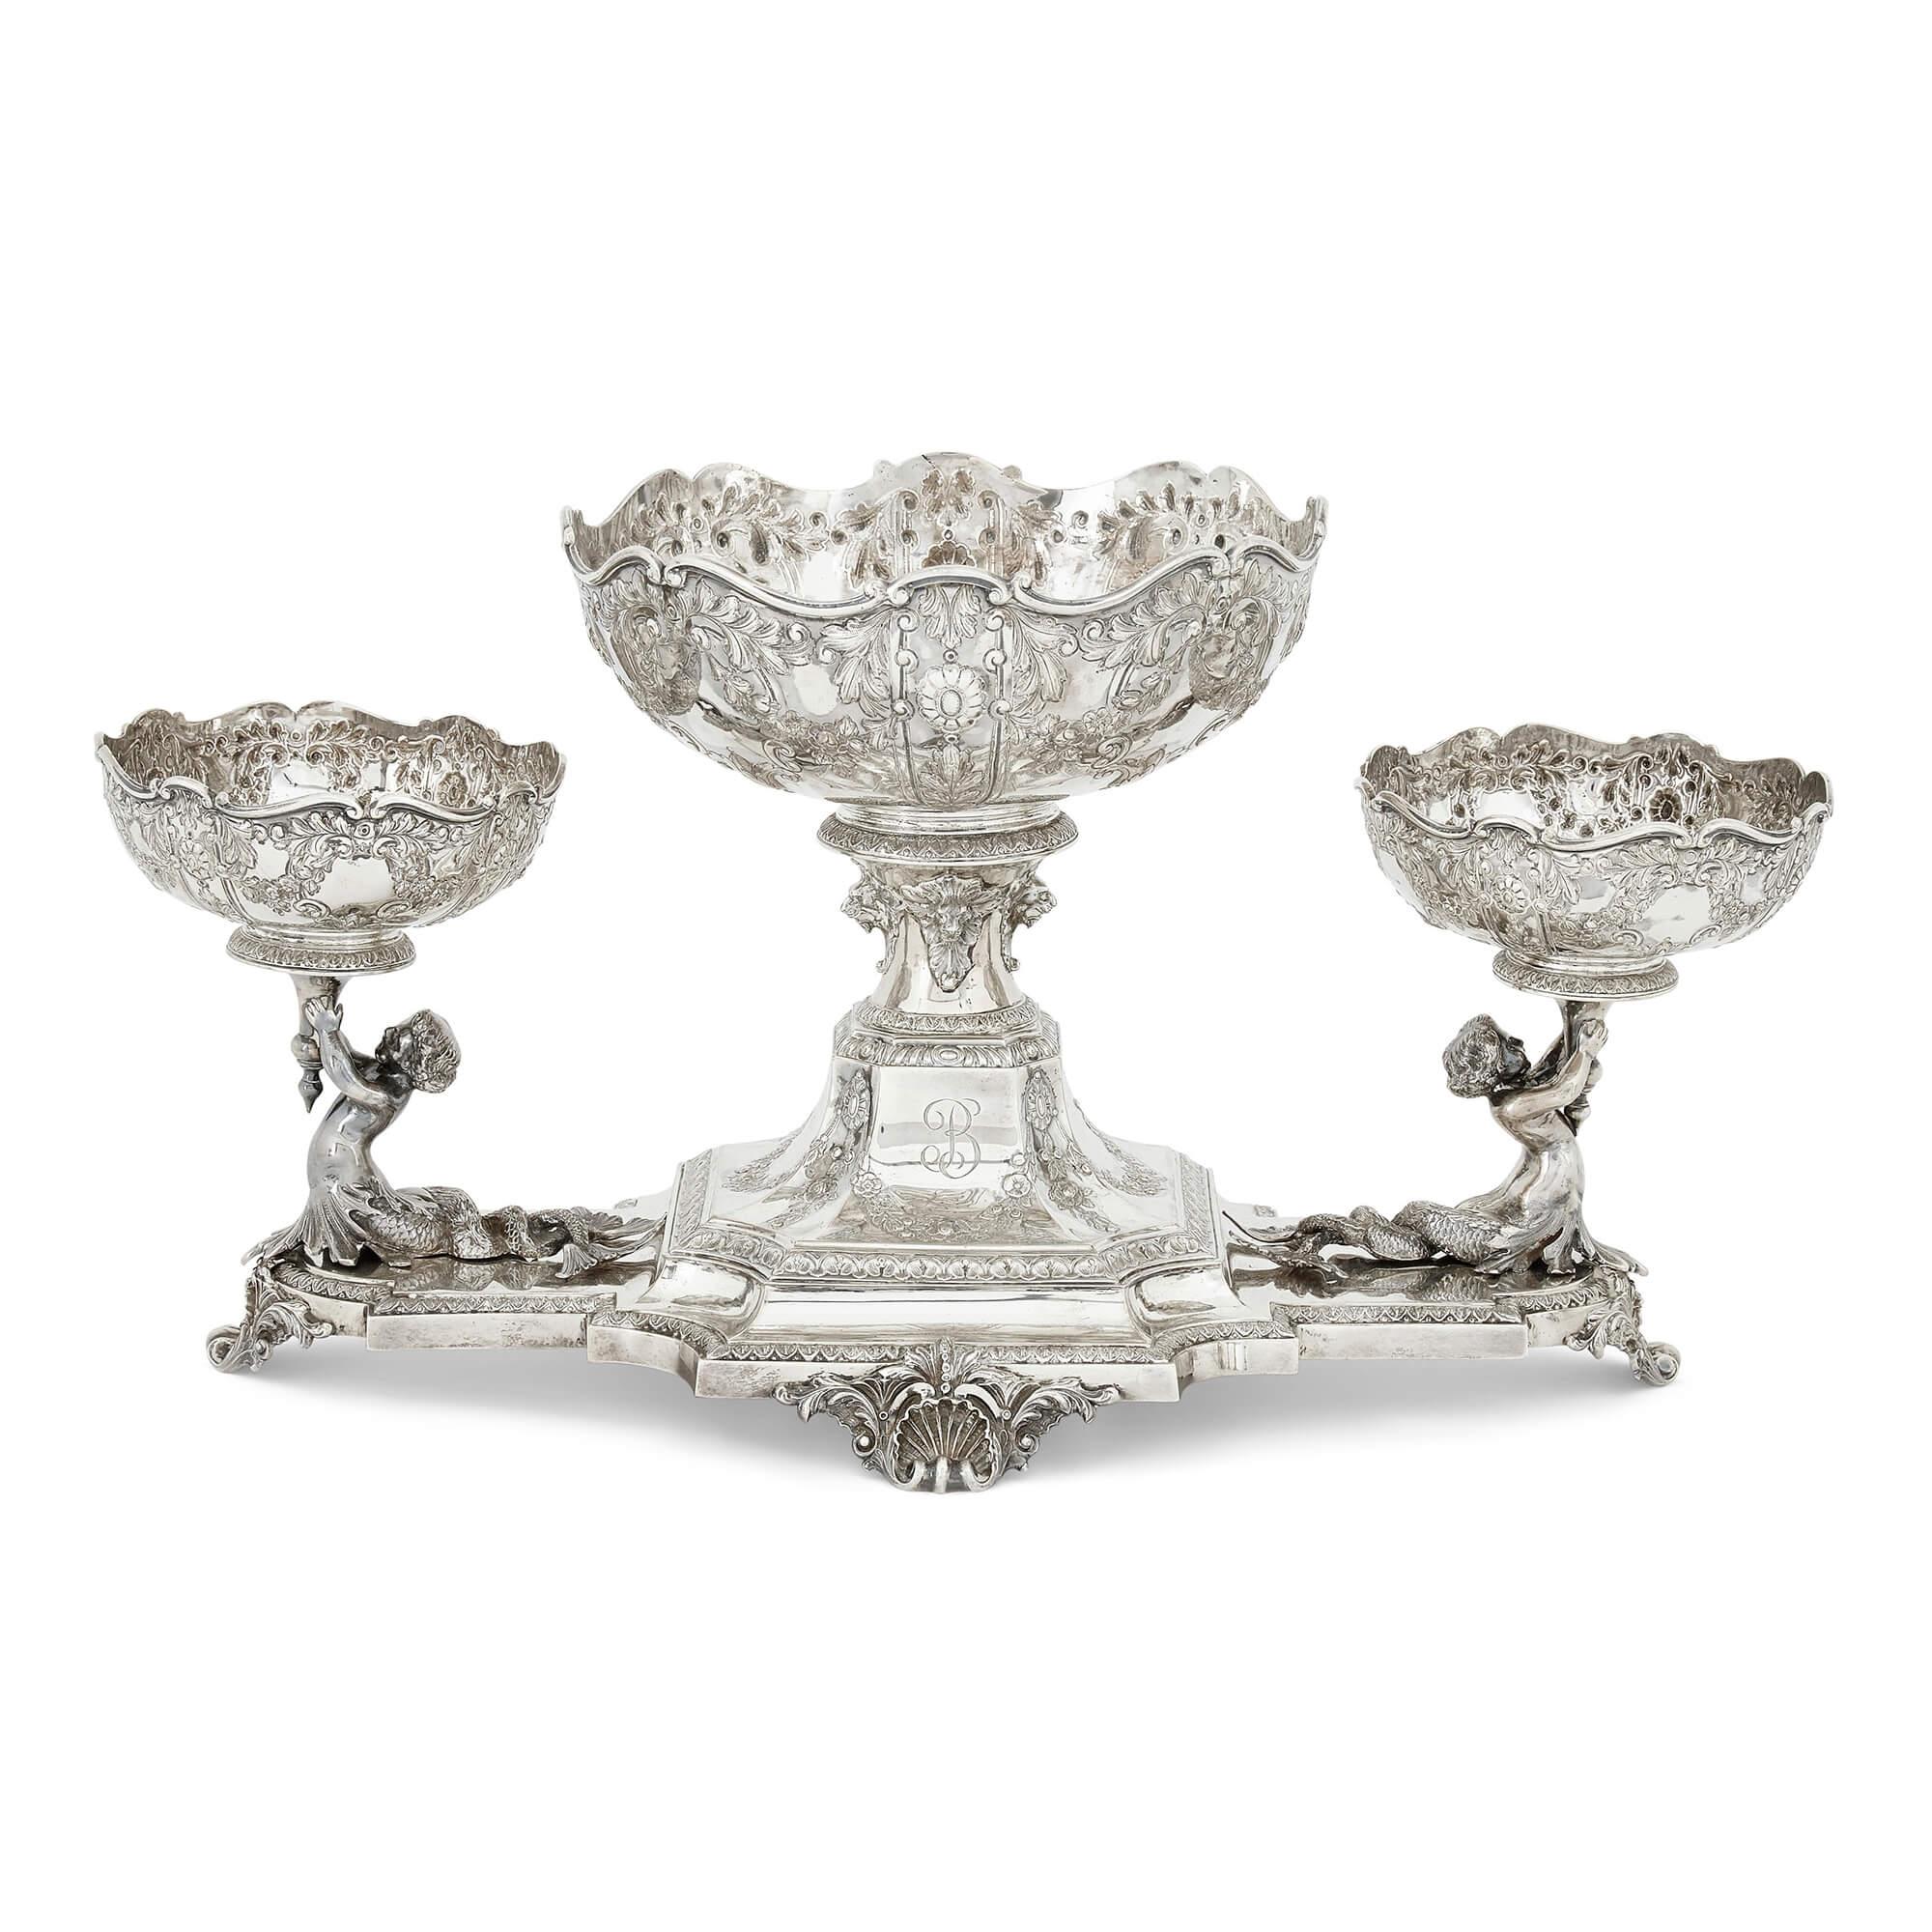 Edwardian silver centrepiece suite by Horace Woodward & Co. London
English, 1905
Epergne: Height 27cm, width 45cm, depth 26cm
Smaller comports: Height 13cm, diameter 14cm

This ornate centrepiece garniture is comprised of five pieces: a central